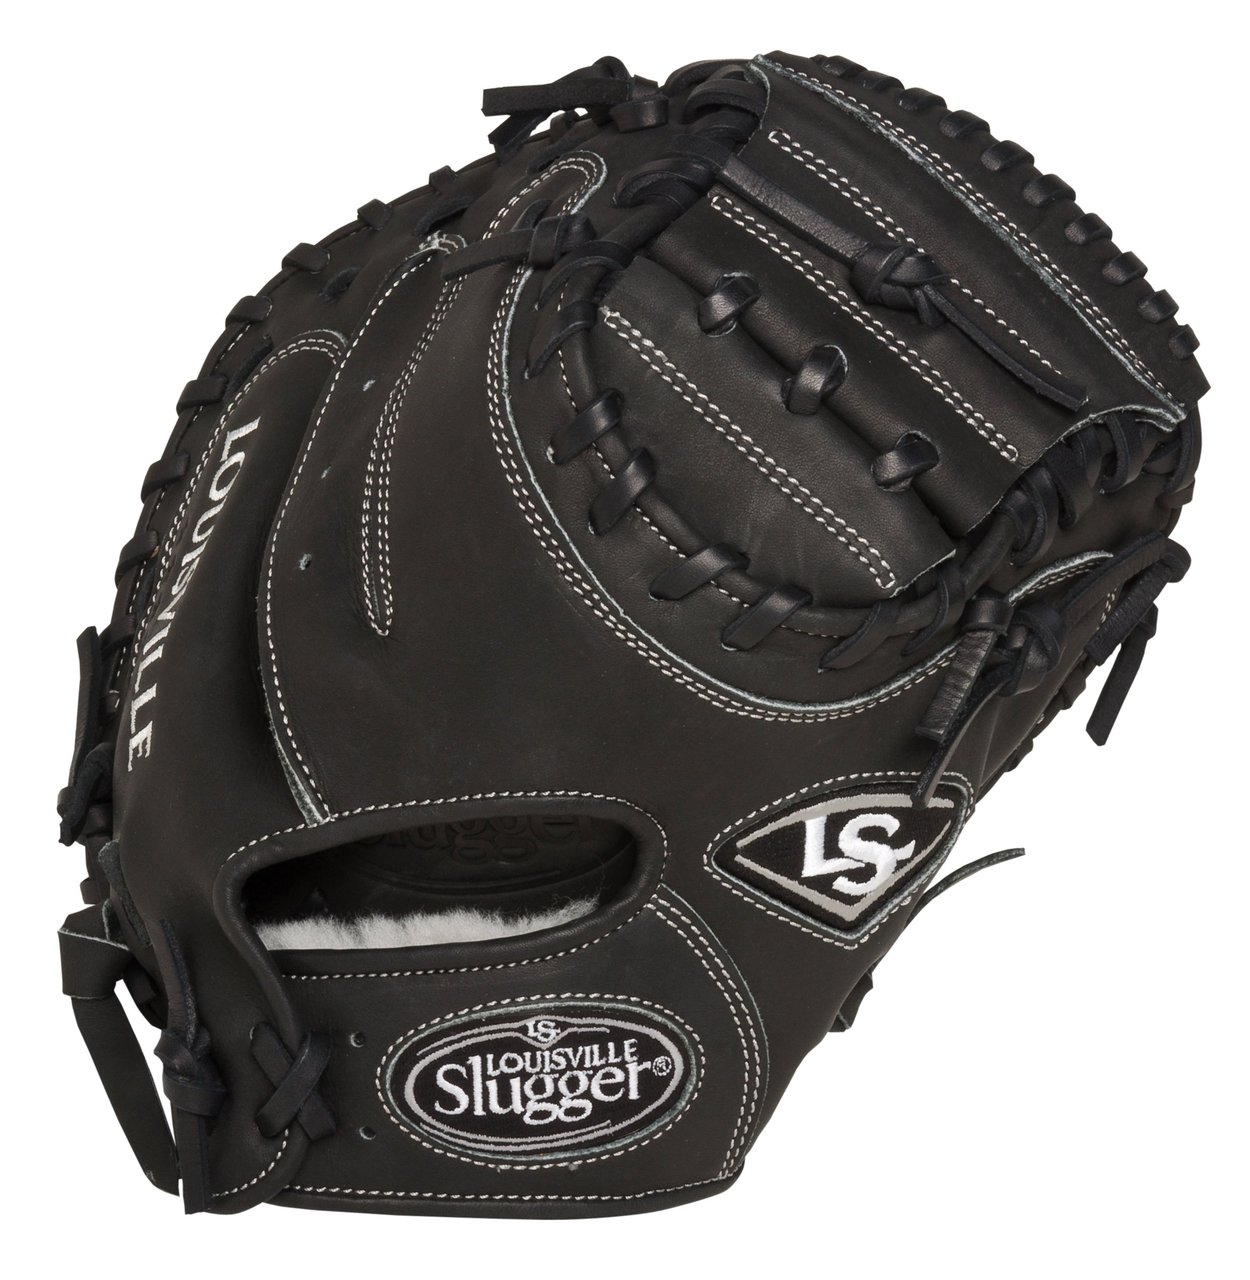 Louisville Slugger Pro Flare Black 32.5 inch Catchers Mitt (Right Handed Throw) : Louisville Slugger Pro Flare gloves are designed to keep pace with the evolution of Baseball. The unique Flare design allows for quick-transfer of ball from glove to hand,because every split second counts. Better technology, better materials and better design. There is a larger catching surface area made possible by the extra wide lacing and curved finger tips. The gloves are made from professional-grade, oil-infused leather for maximum feel and performance right off the shelf.